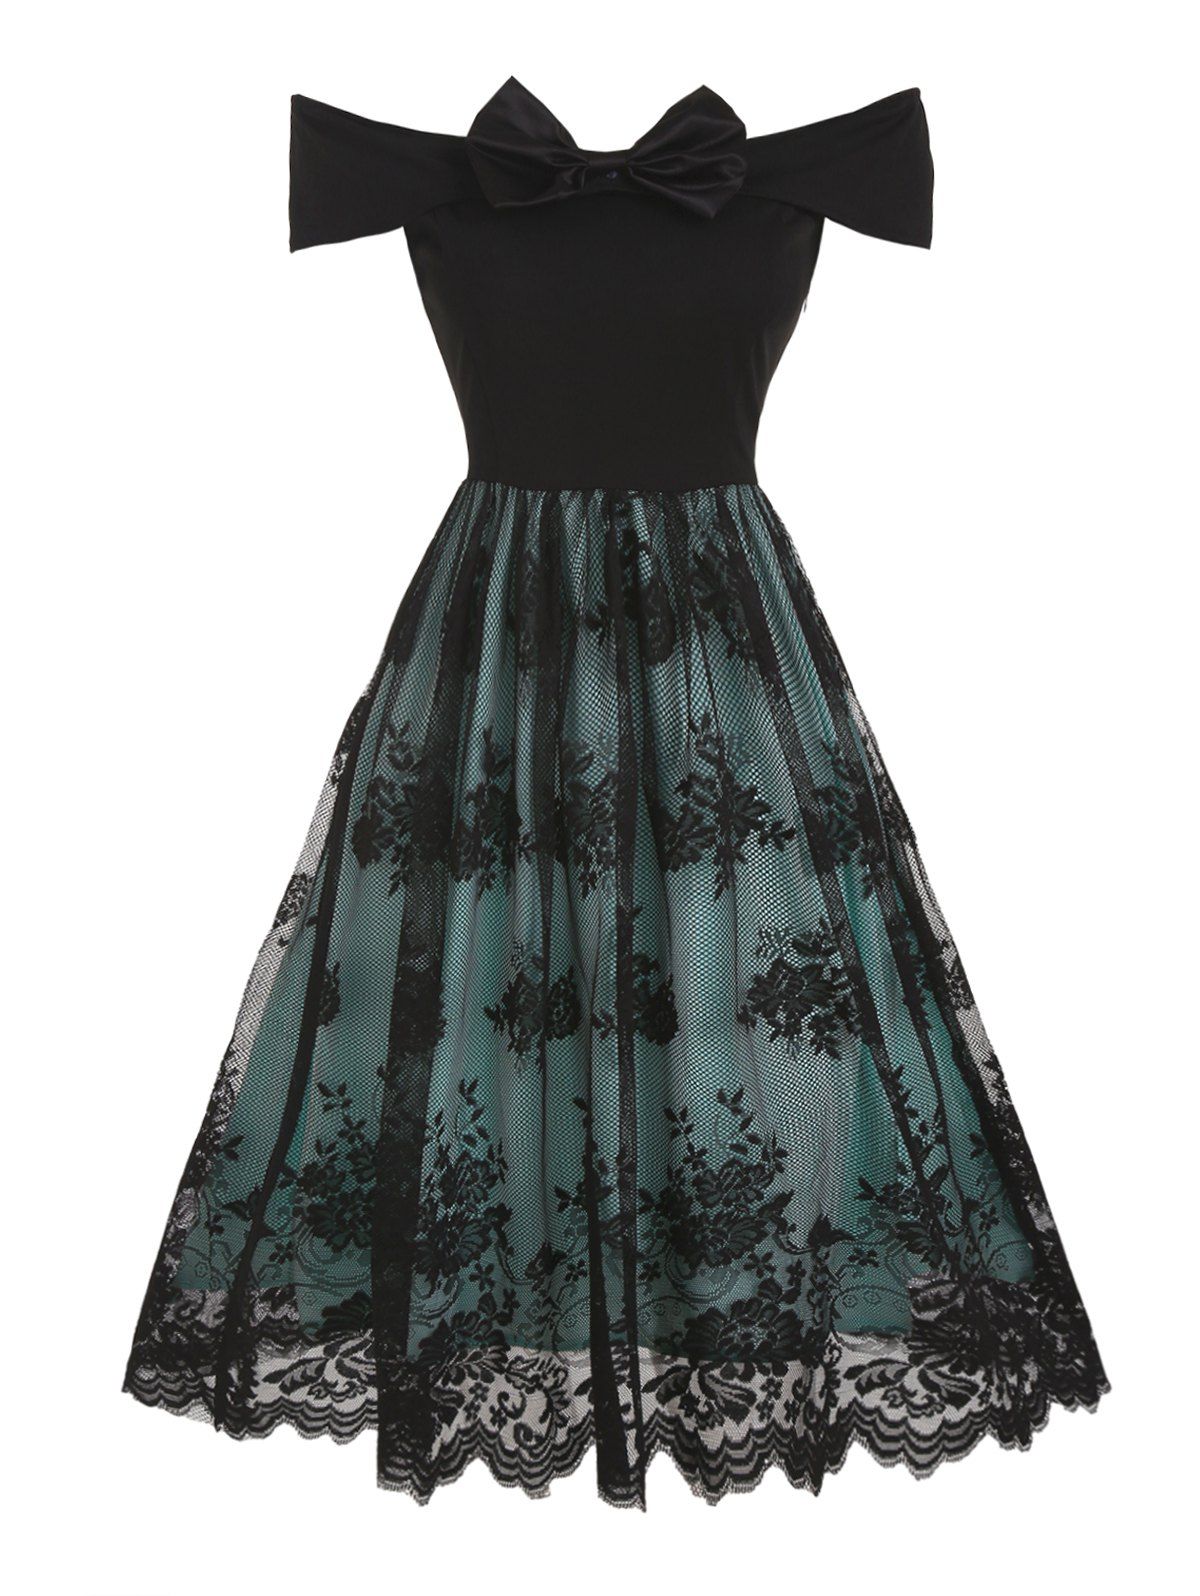 Flower Lace Overlay Party Dress Off The Shoulder Mini Dress Bowknot A Line Dress - GREEN 2XL